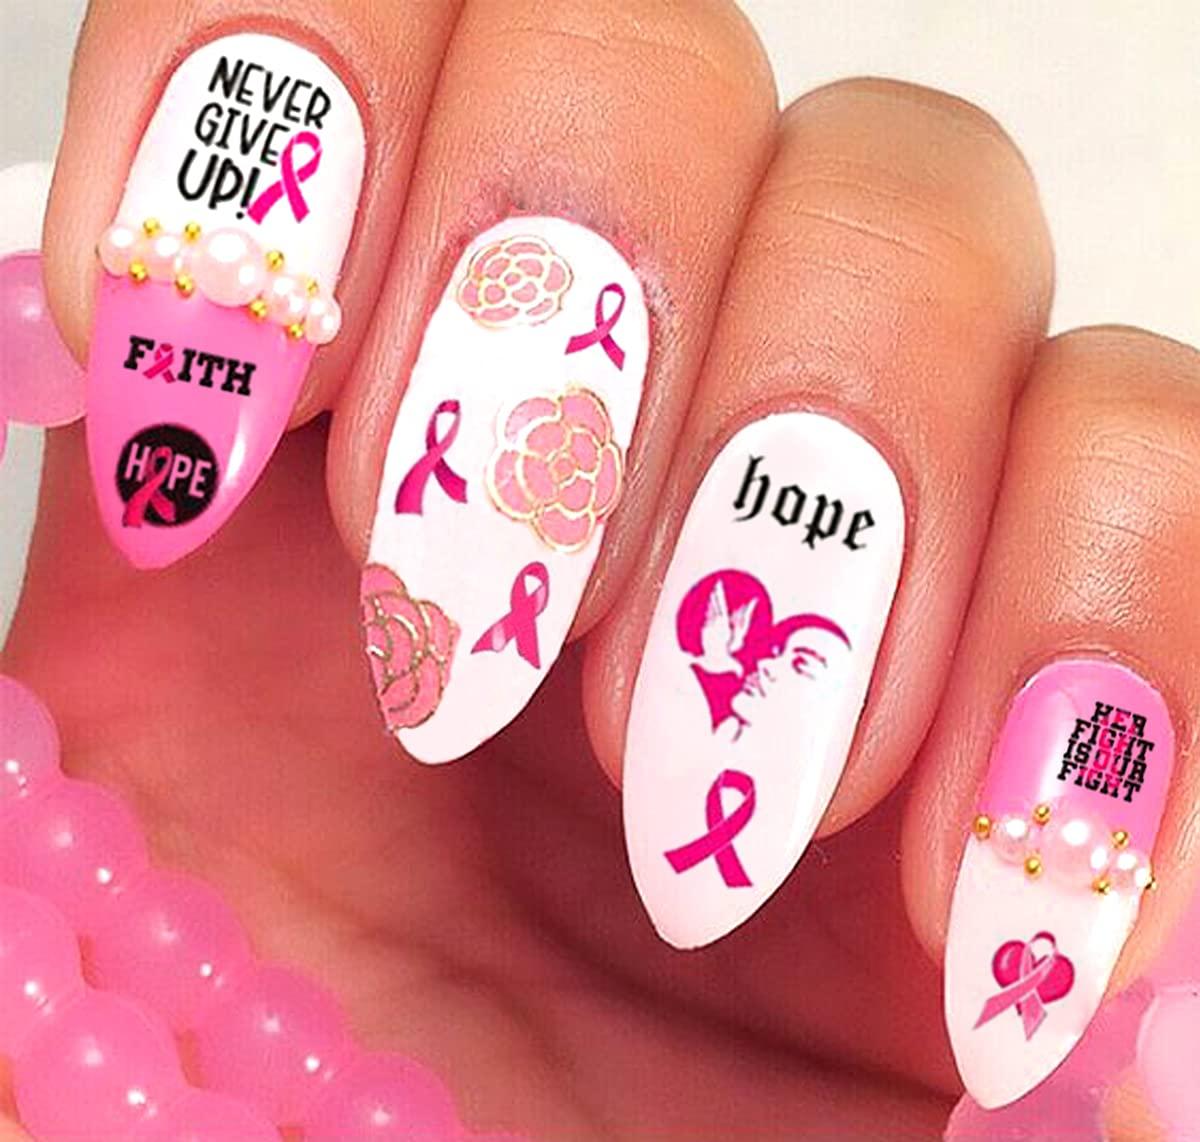  Breast Cancer Nail Art Stickers 3D Self-Adhesive Nail Decals  Pink Ribbon Nail Stickers Nail Art Supplies Heart Breast Cancer Awareness  Nail Designs for Nail Art Decoration DIY Manicure Tips 6 Sheets 